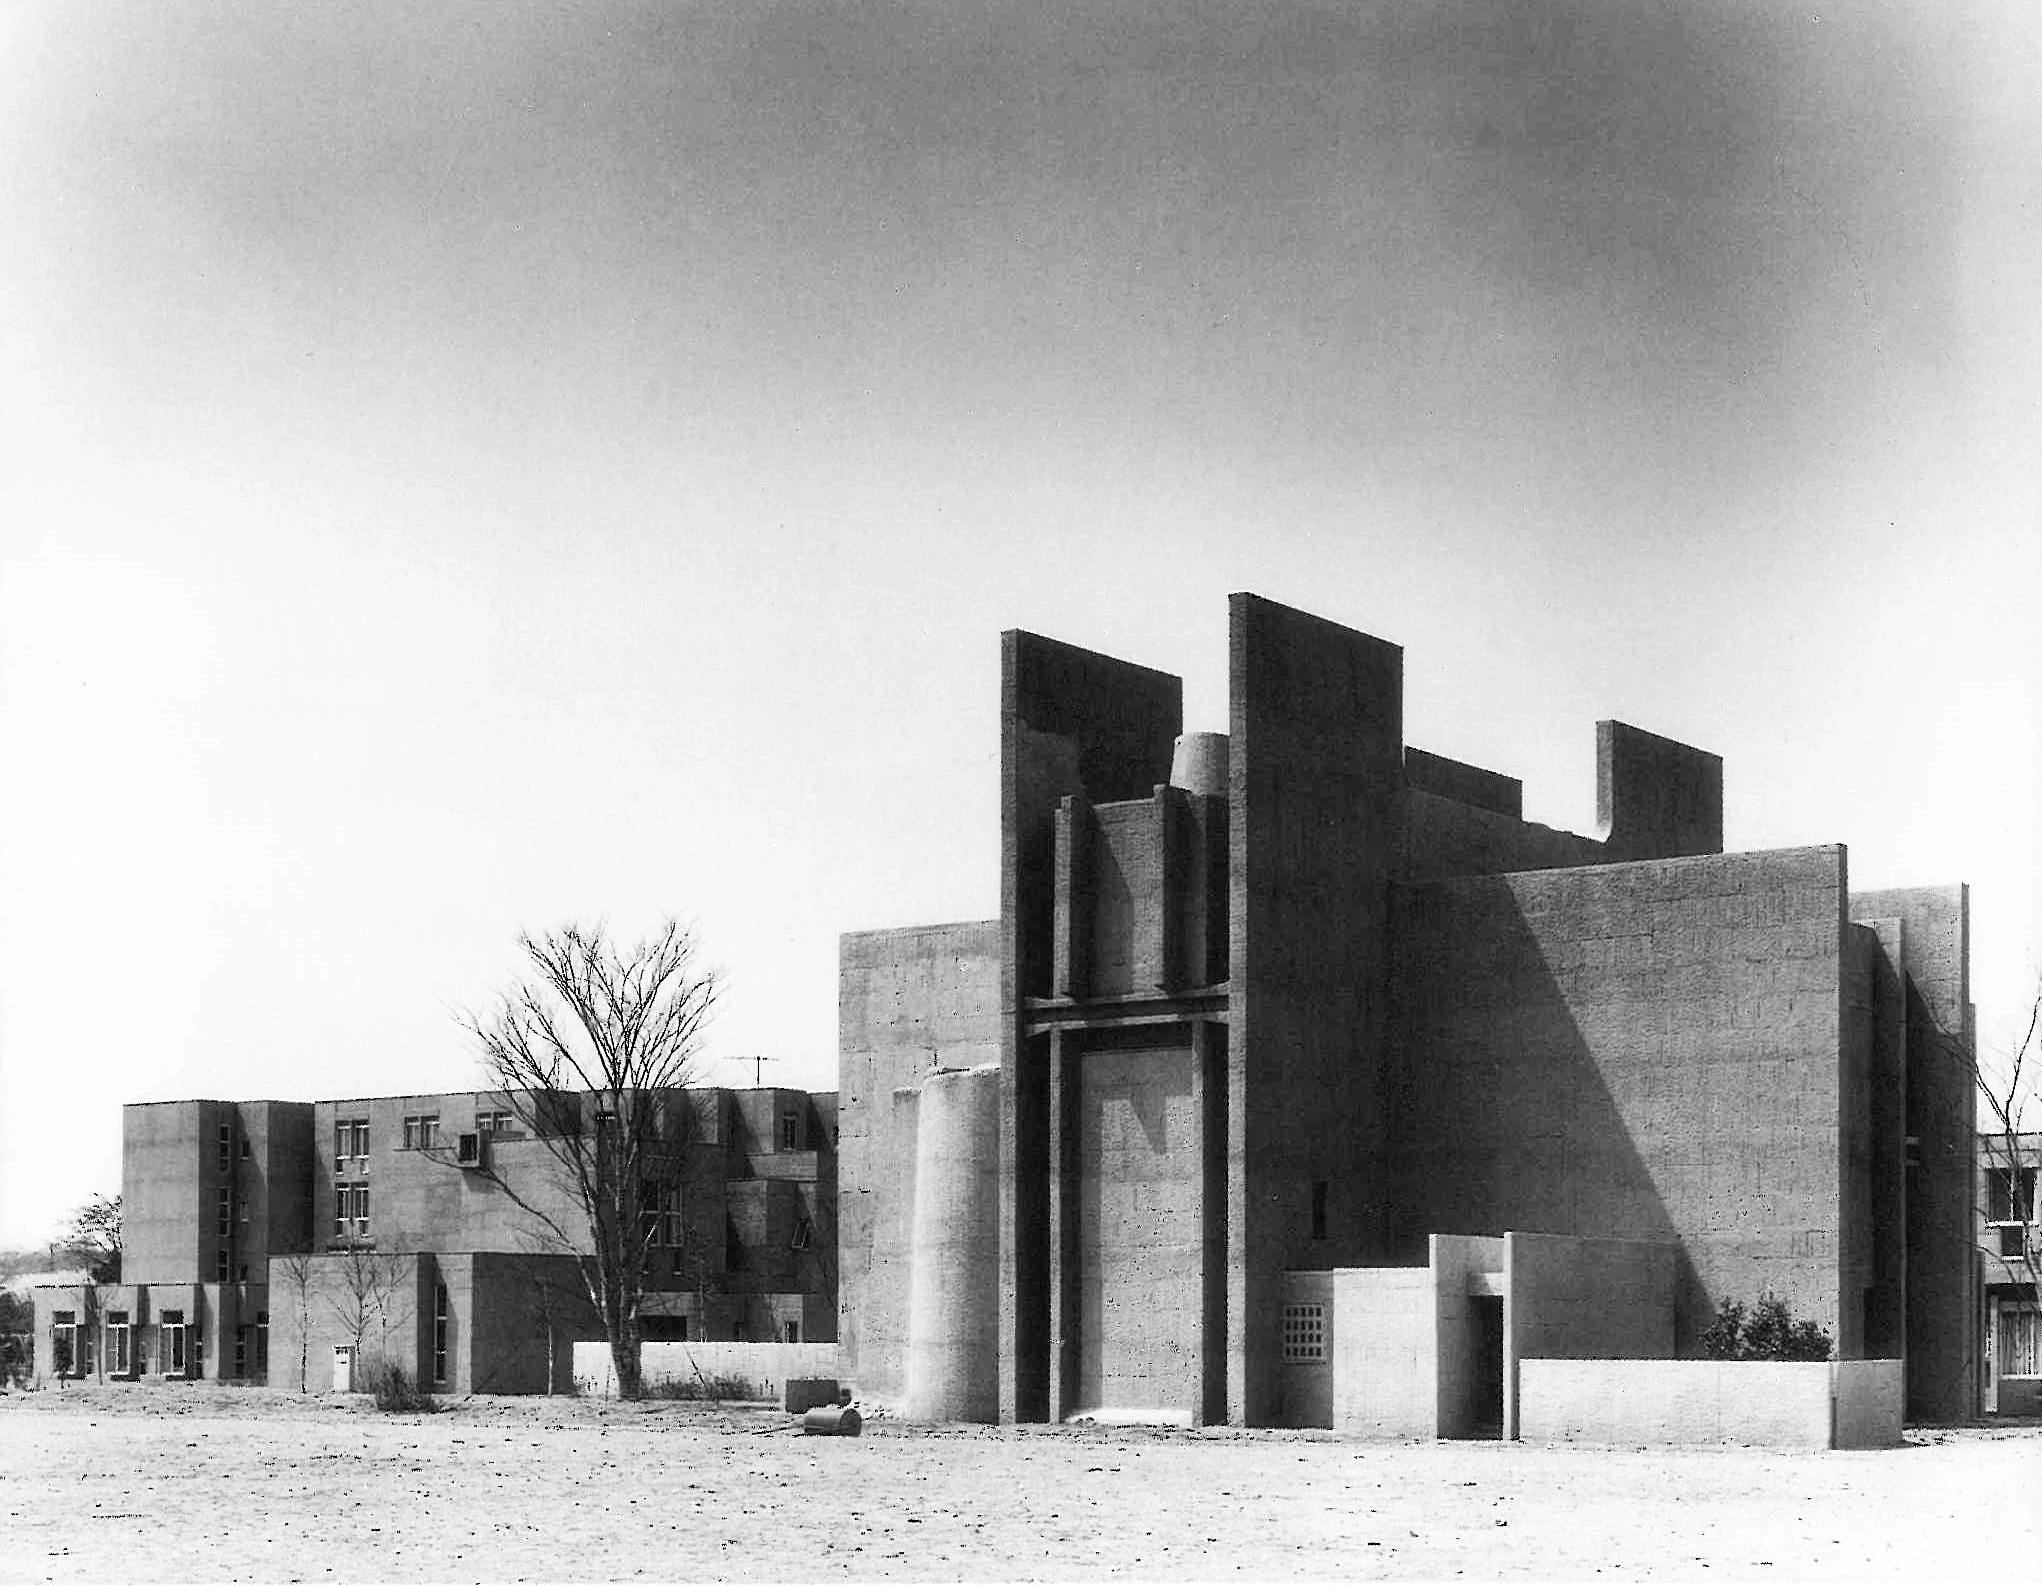 Japan Lutheran Theological Seminary in Tokyo Japan by Togo Murano in 1969